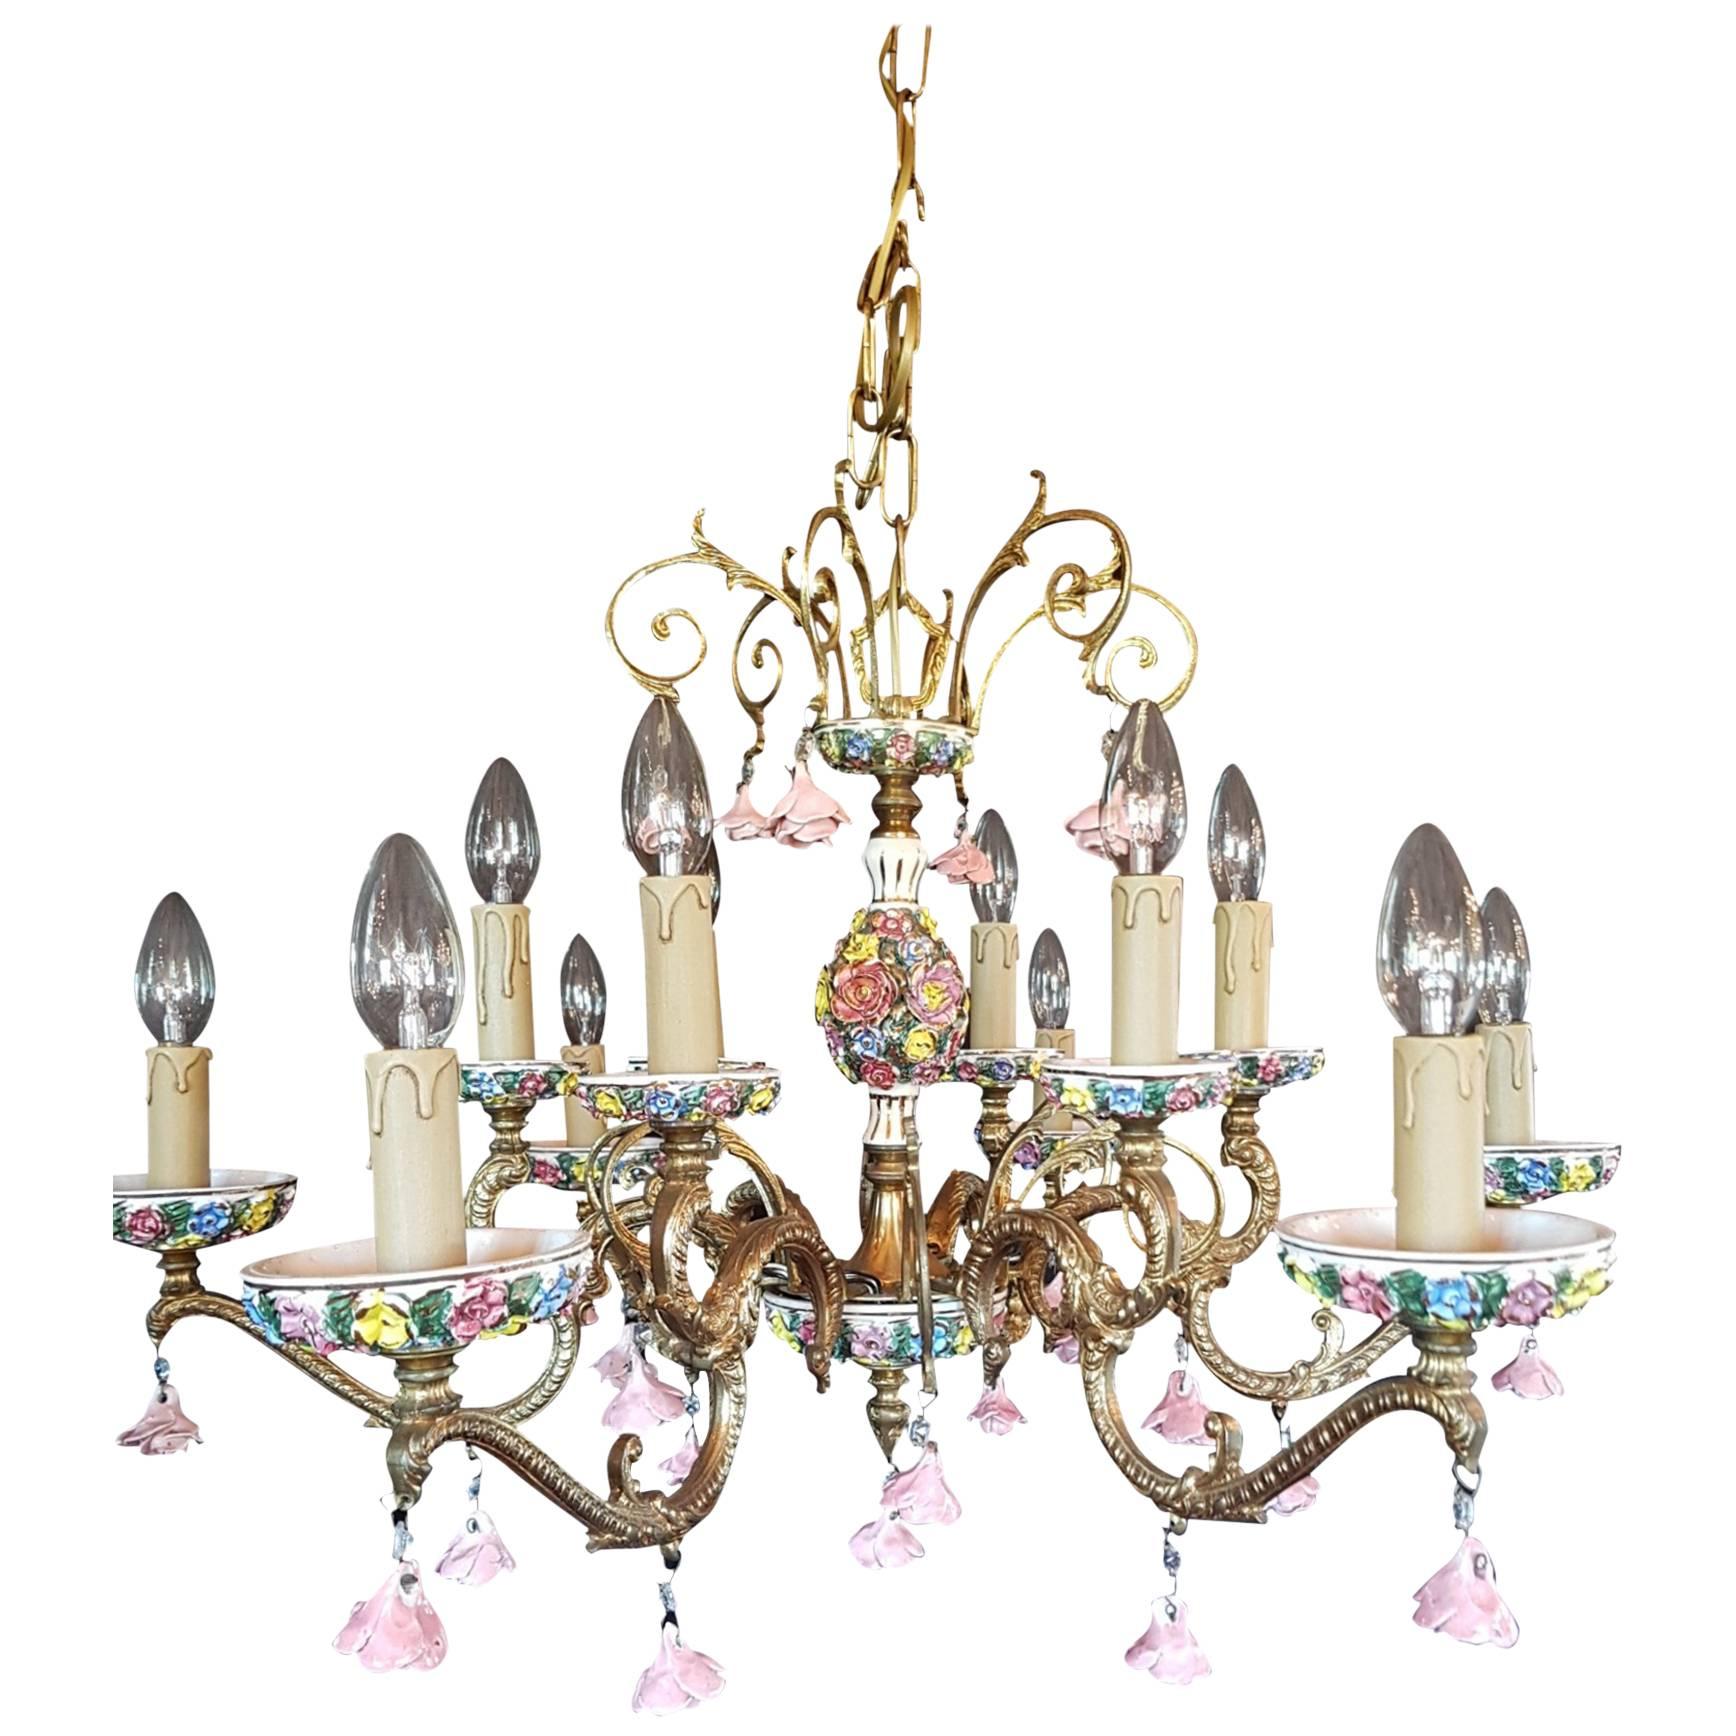 Italian Bronze and Porcelain Chandelier with Flowers, 12 Lights, 20th Century For Sale